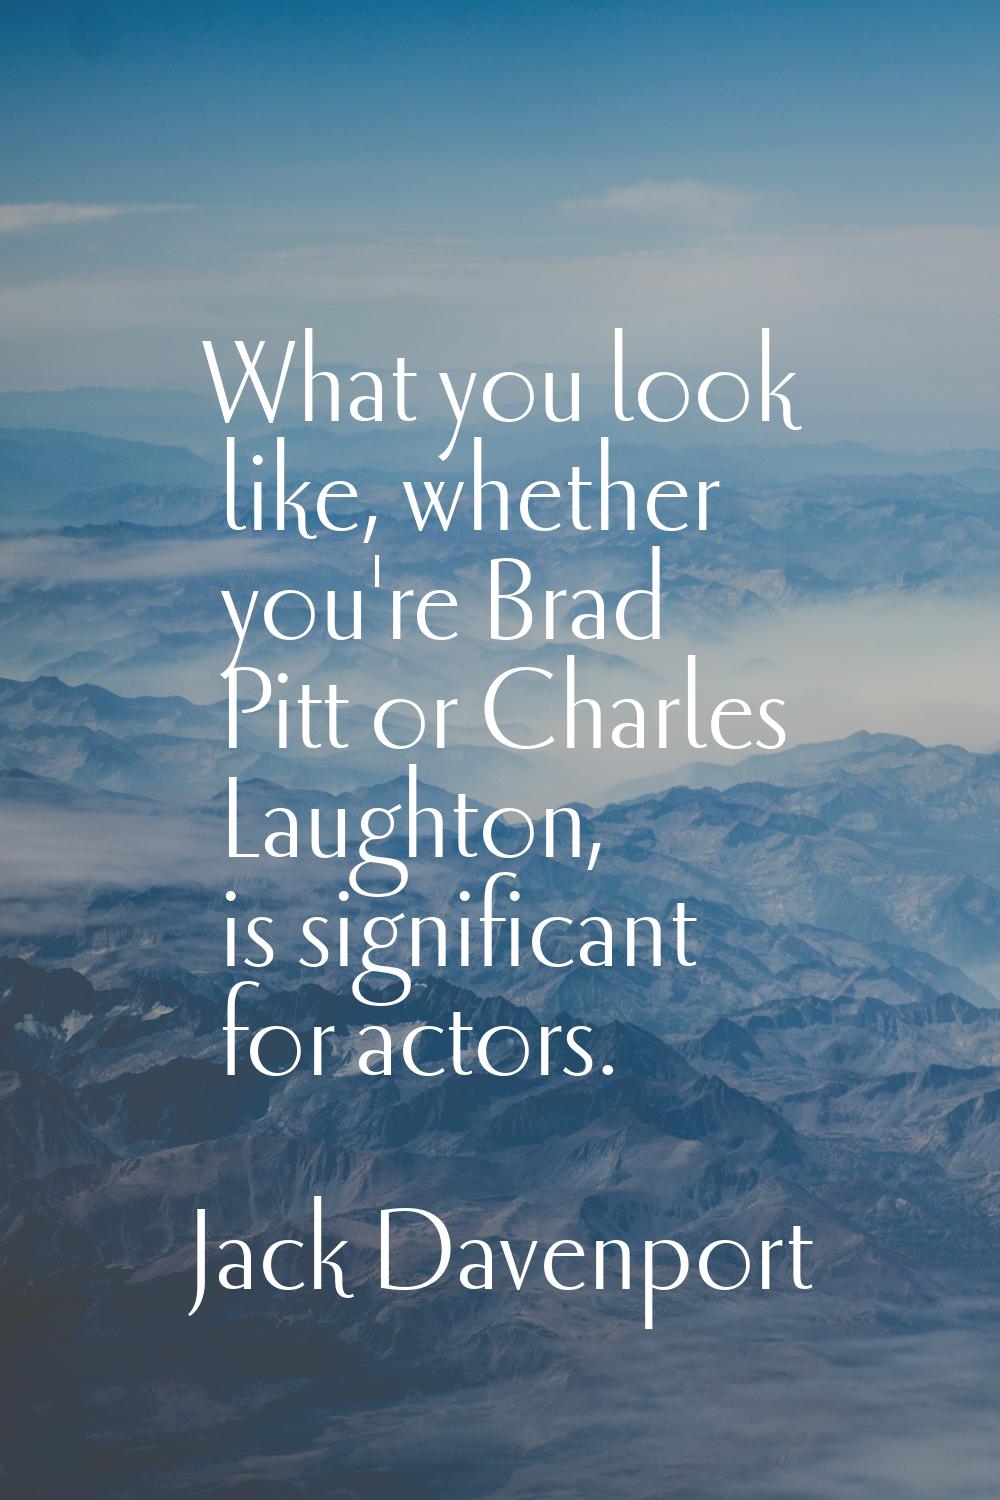 What you look like, whether you're Brad Pitt or Charles Laughton, is significant for actors.